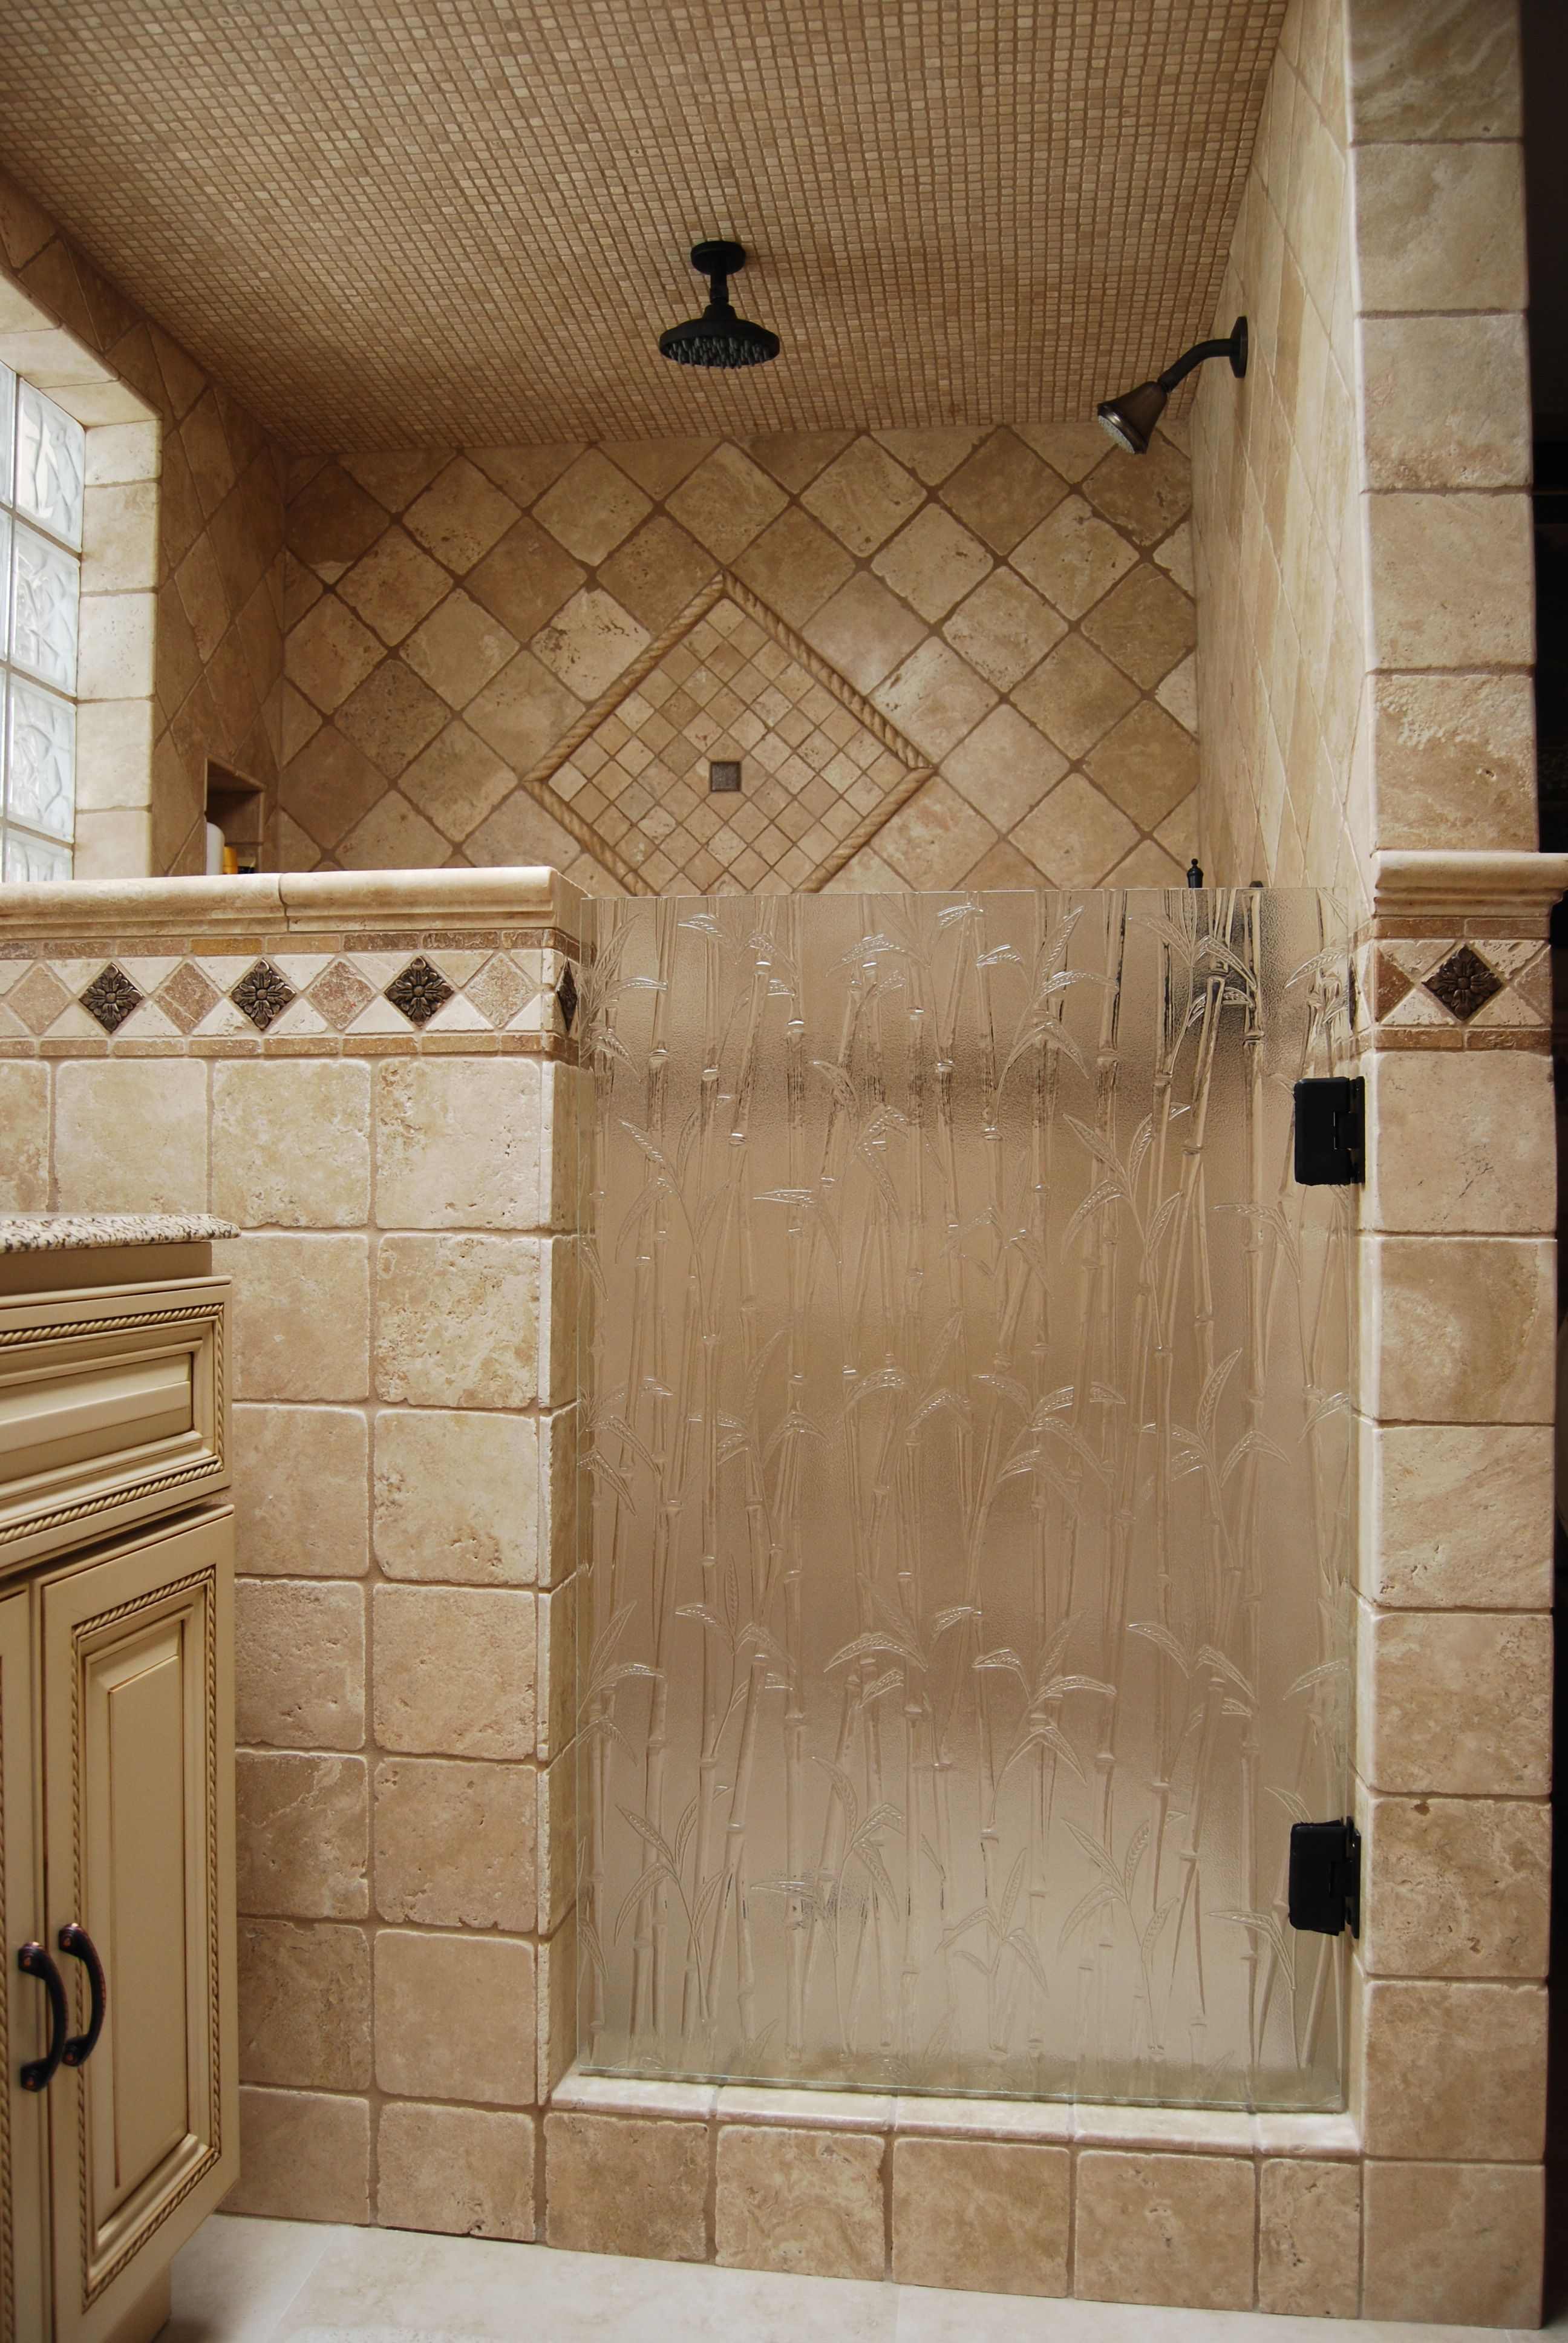 Shower Door Done With Bamboo Textured Glass Bathrooms And All regarding dimensions 2592 X 3872